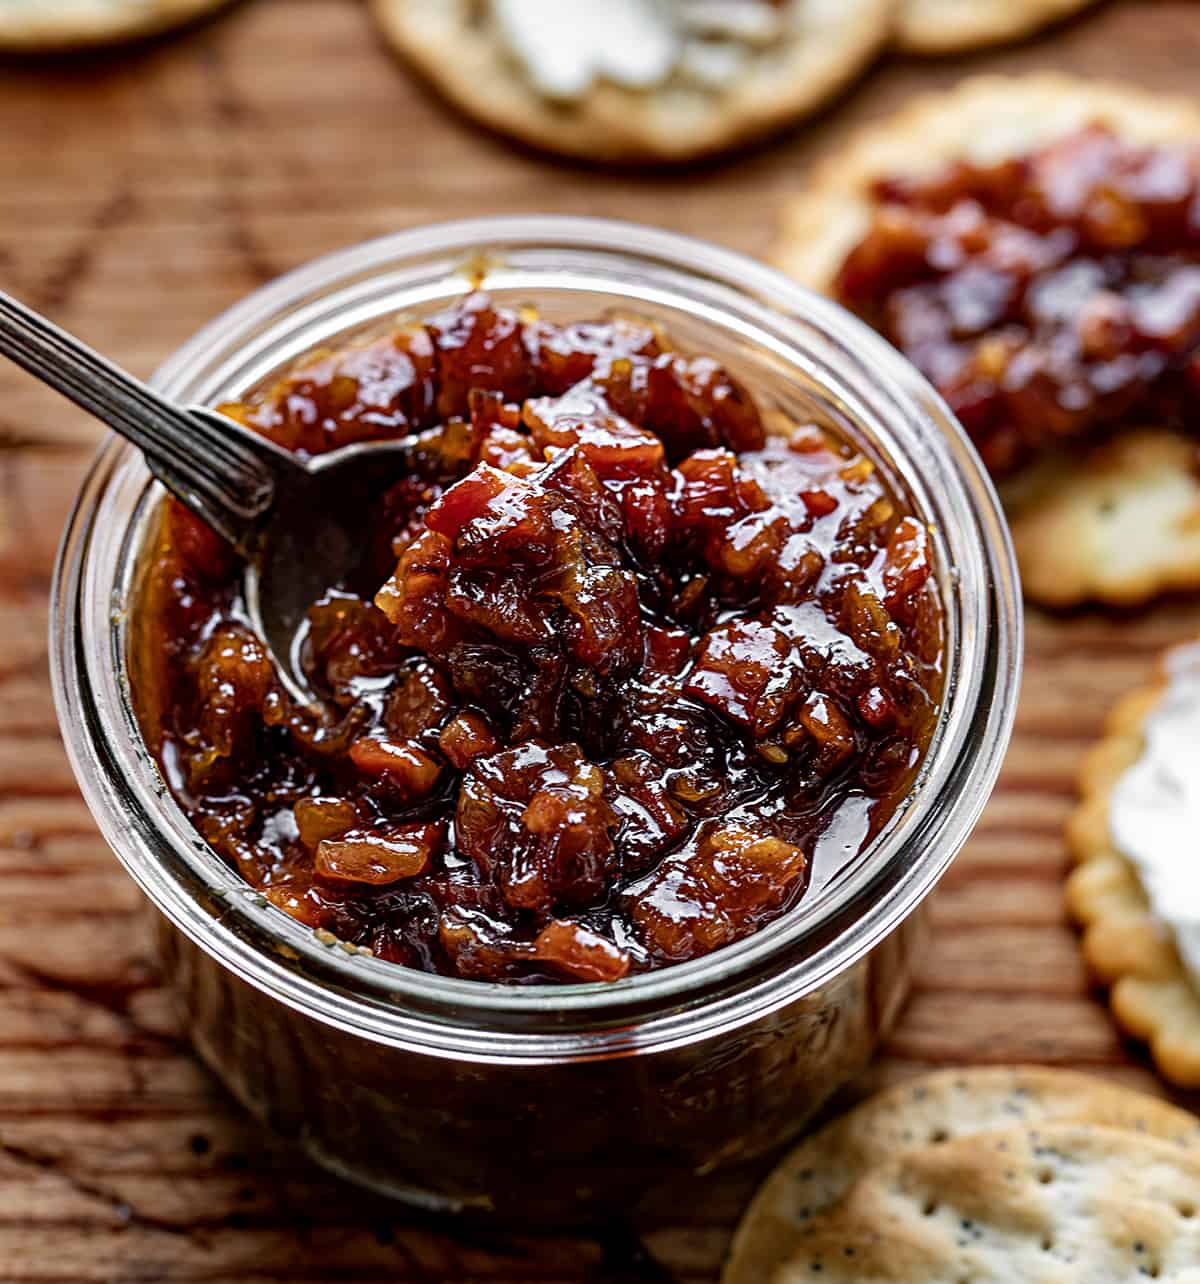 Jar of Whiskey Bacon Jam with a Spoon and Surrounded by Crackers.